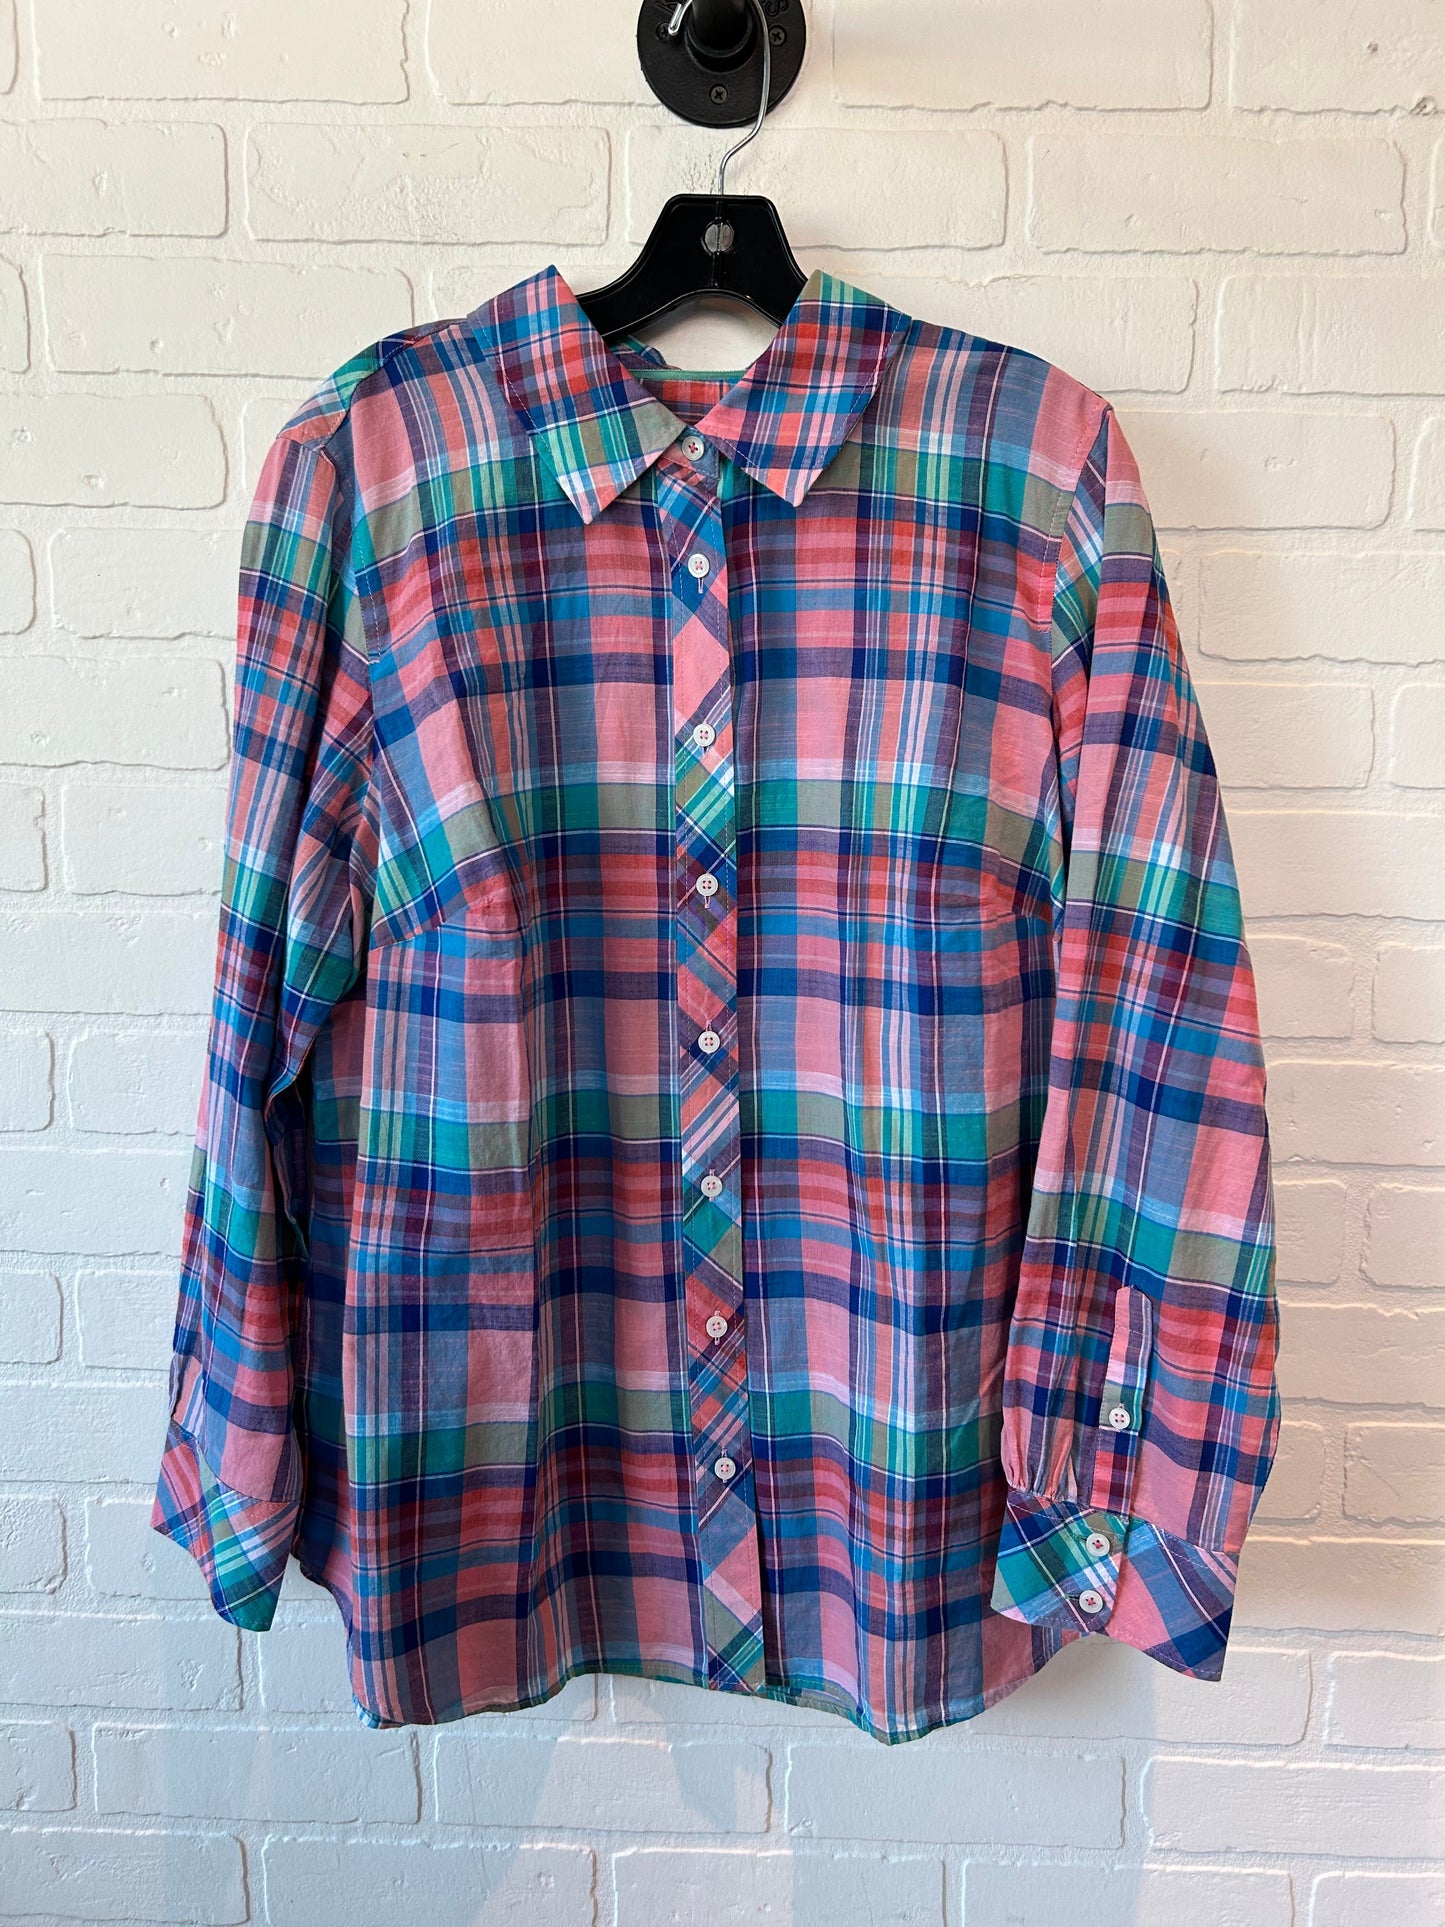 Blue & Pink Top Long Sleeve Talbots, Size 1x